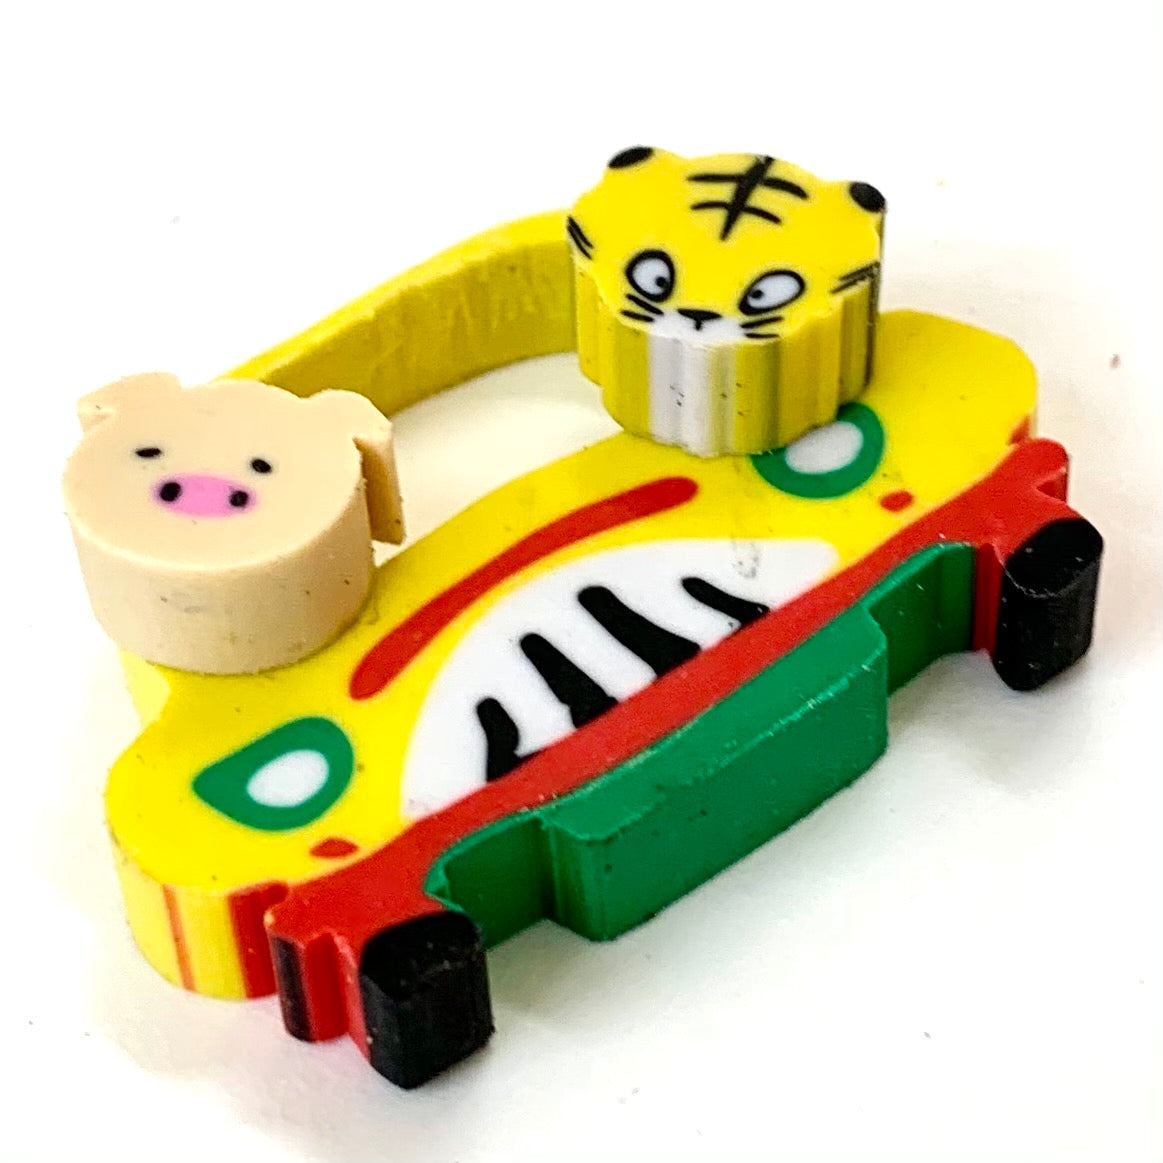 38809 LETS CRUISE WITH 2  ANIMAL ERASERS-40